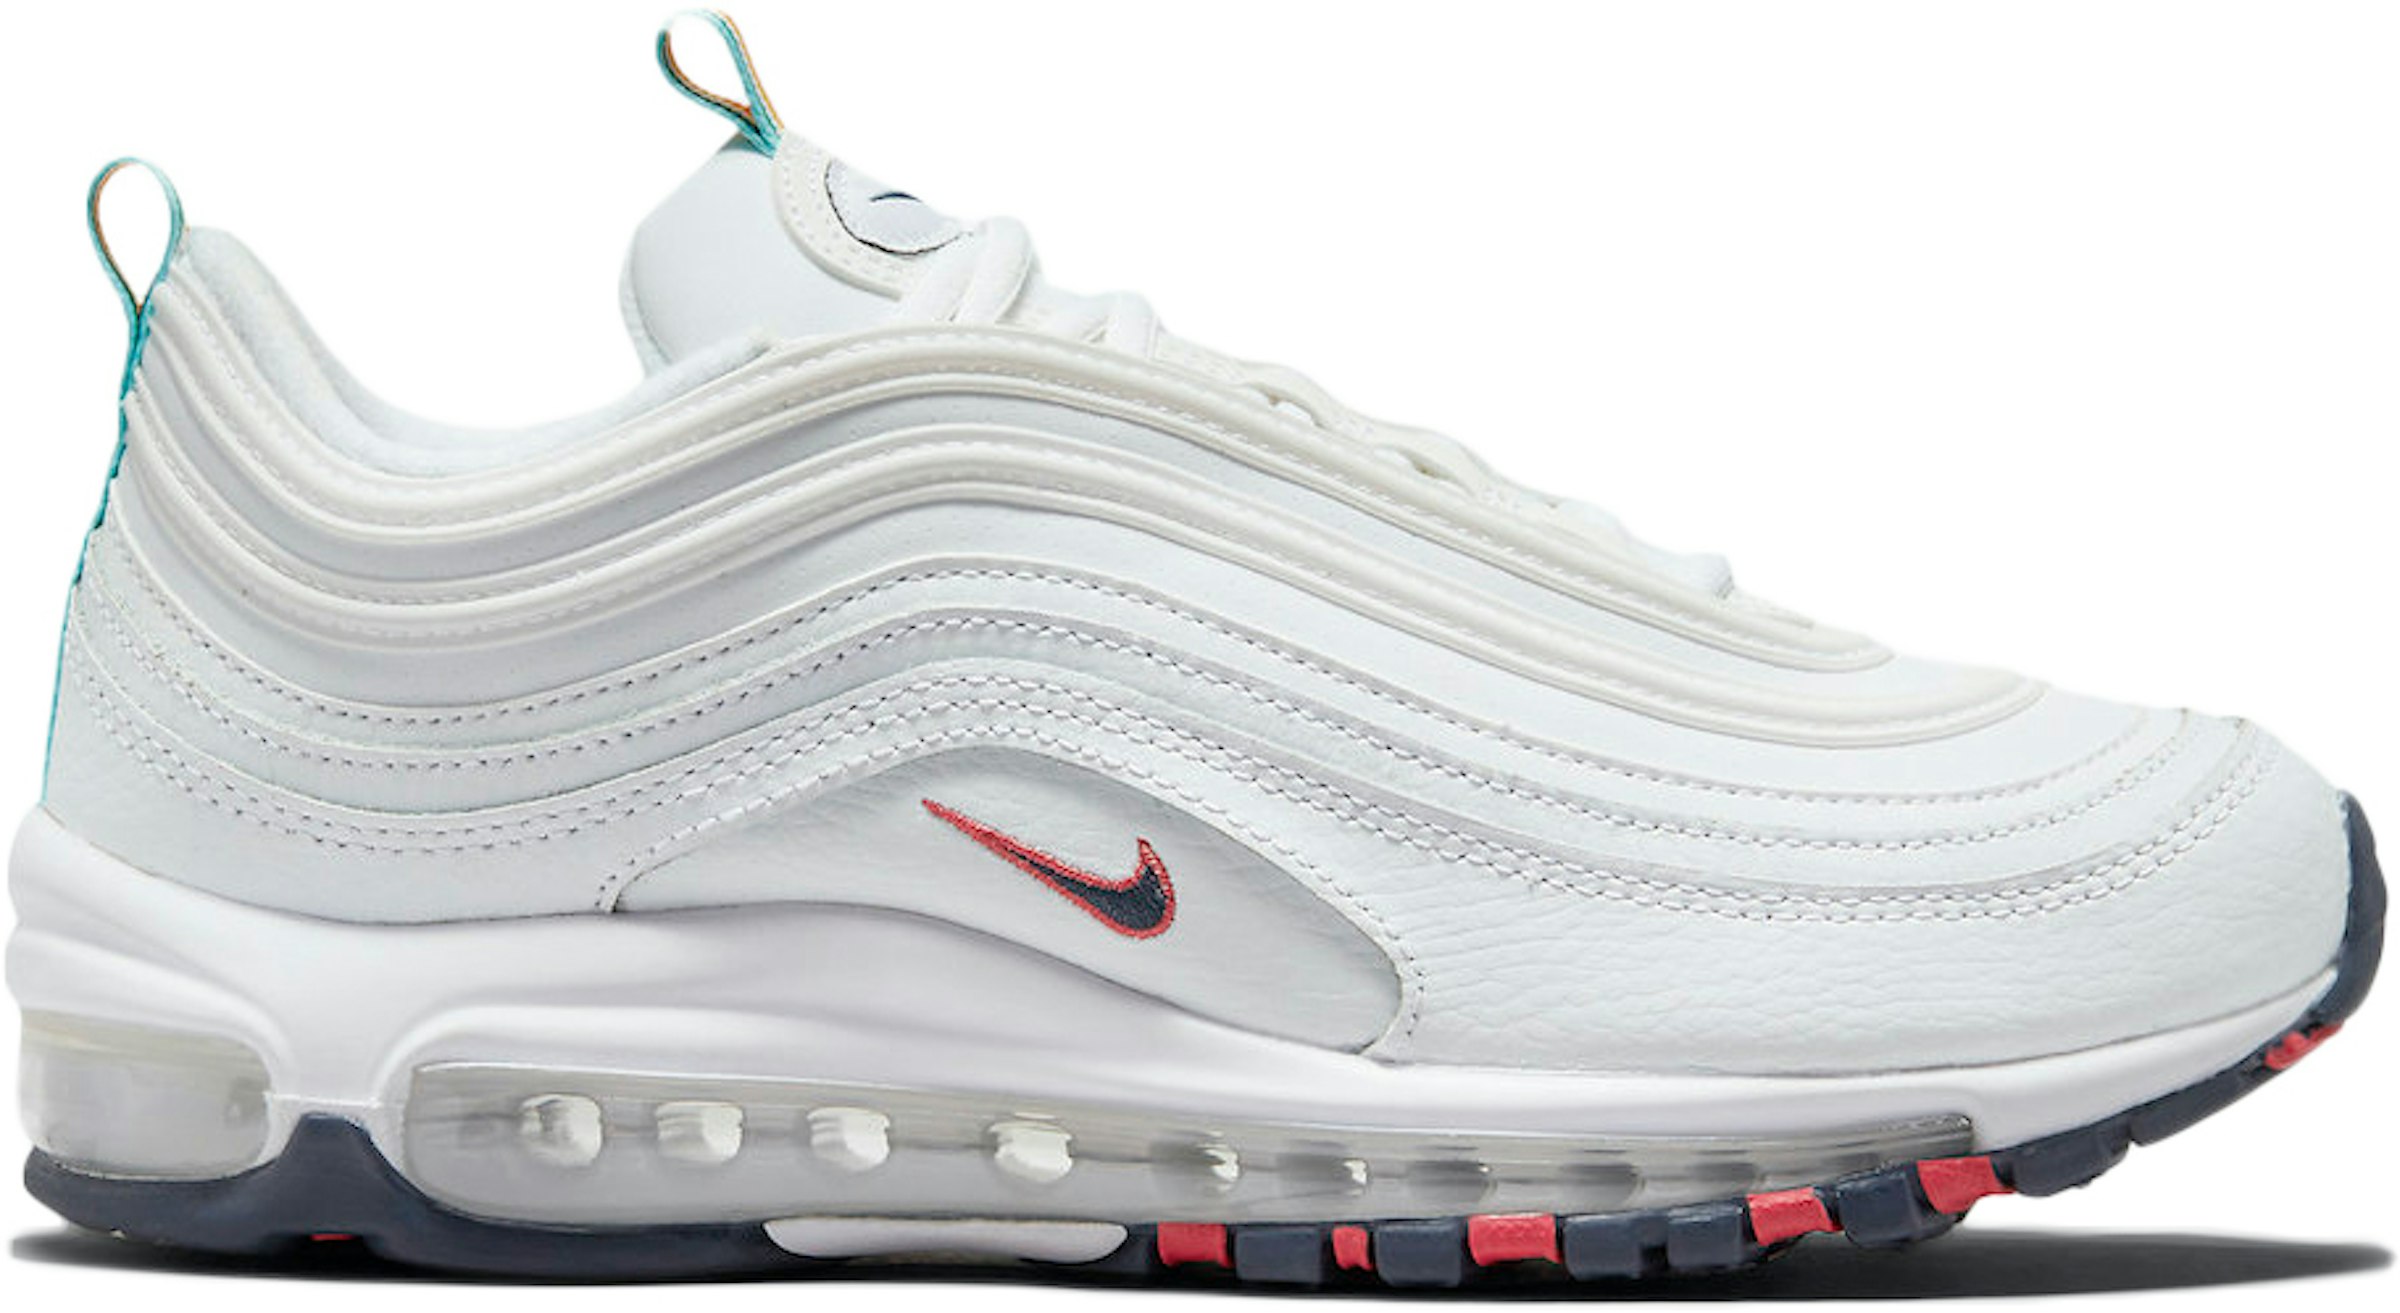 rodear capacidad rival Nike Air Max 97 White Multi Color Pull Tabs (Women's) - DH1592-100 - US